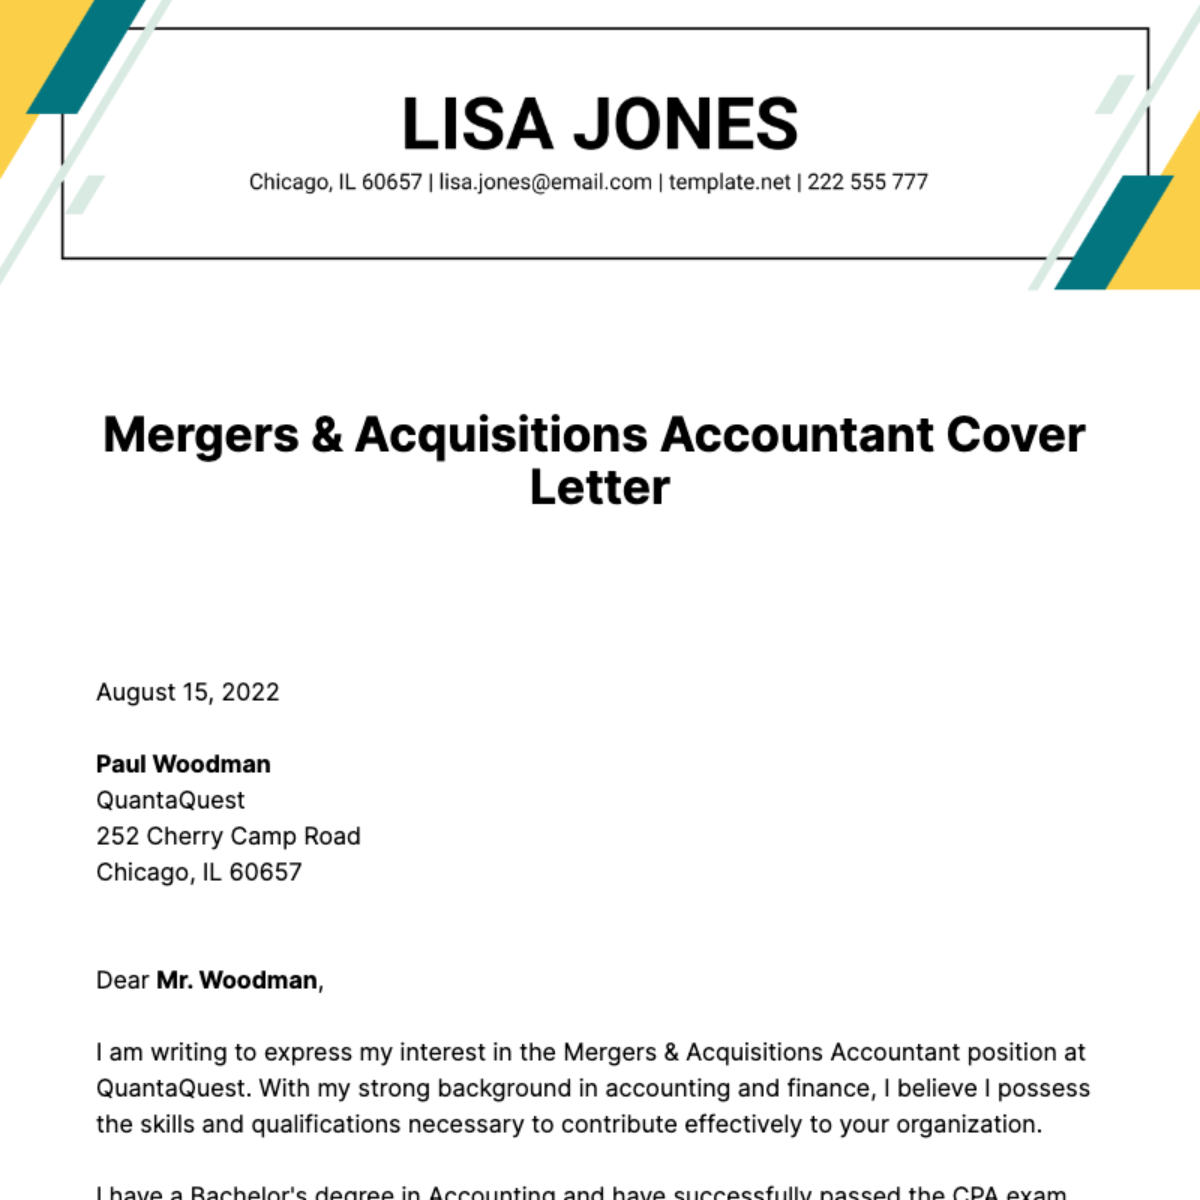 Mergers & Acquisitions Accountant Cover Letter Template